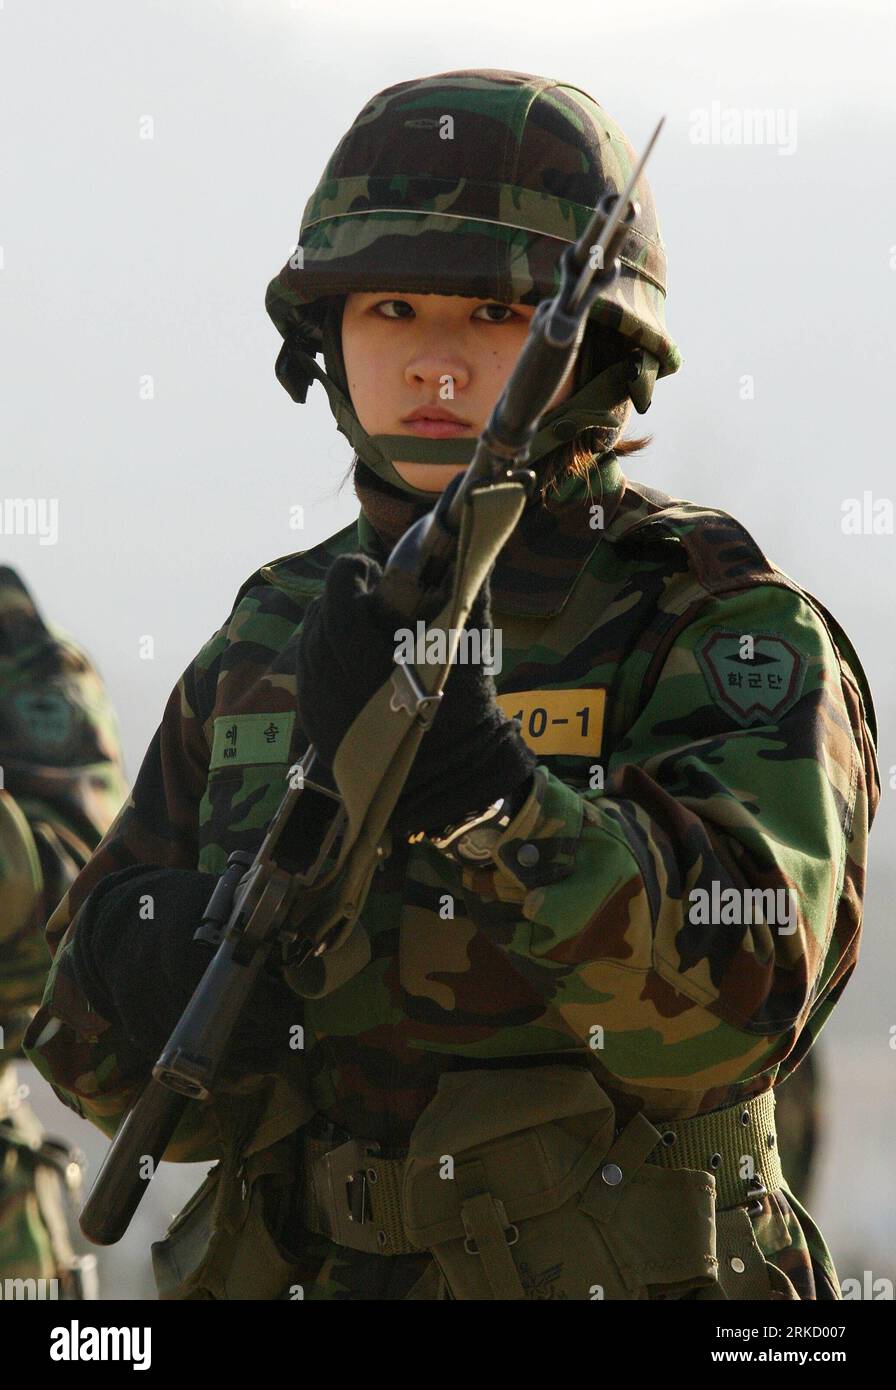 Bildnummer: 54831024  Datum: 19.01.2011  Copyright: imago/Xinhua (110119)--SUNGNAM, Jan. 19, 2011 (Xinhua)-- A cadet of South Korea s first female Reserve Officers Training Corps (ROTC) participates a basic millitary training for female cadets at Army Cadet Command in Sungnam, Gyeonggi province of South Korea on Jan. 19, 2011. The South Korean Defense Ministry brought women into its college-based Reserve Officers Training Program for the first time since the program began in 1963.(Xinhua/Park Jin Hee)(jy) SOUTH KOREA-SUNGNAM-FEMALE-RESERVE OFFICER-MILLITARY TRAINING PUBLICATIONxNOTxINxCHN Gese Stock Photo